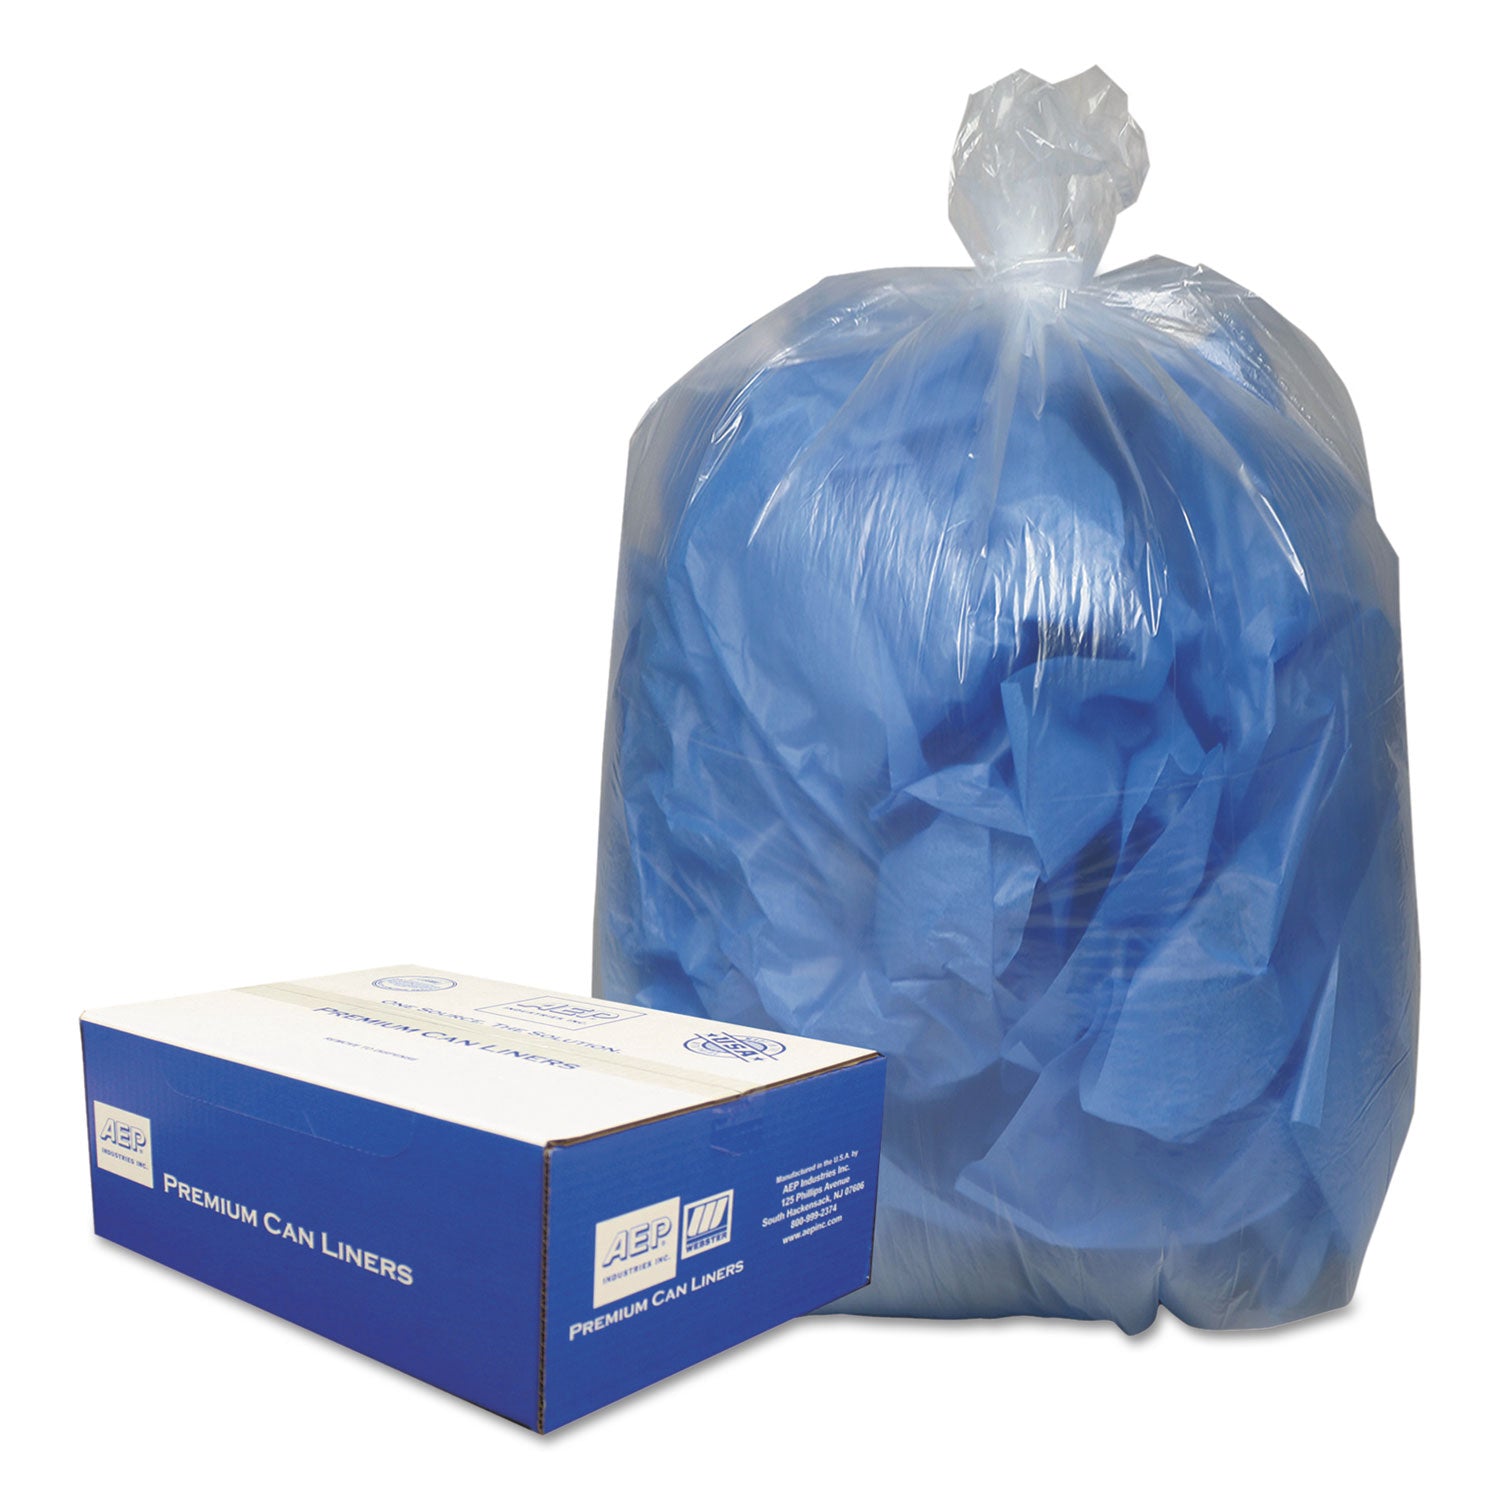 linear-low-density-can-liners-60-gal-09-mil-38-x-58-clear-10-bags-roll-10-rolls-carton_wbi385822c - 1